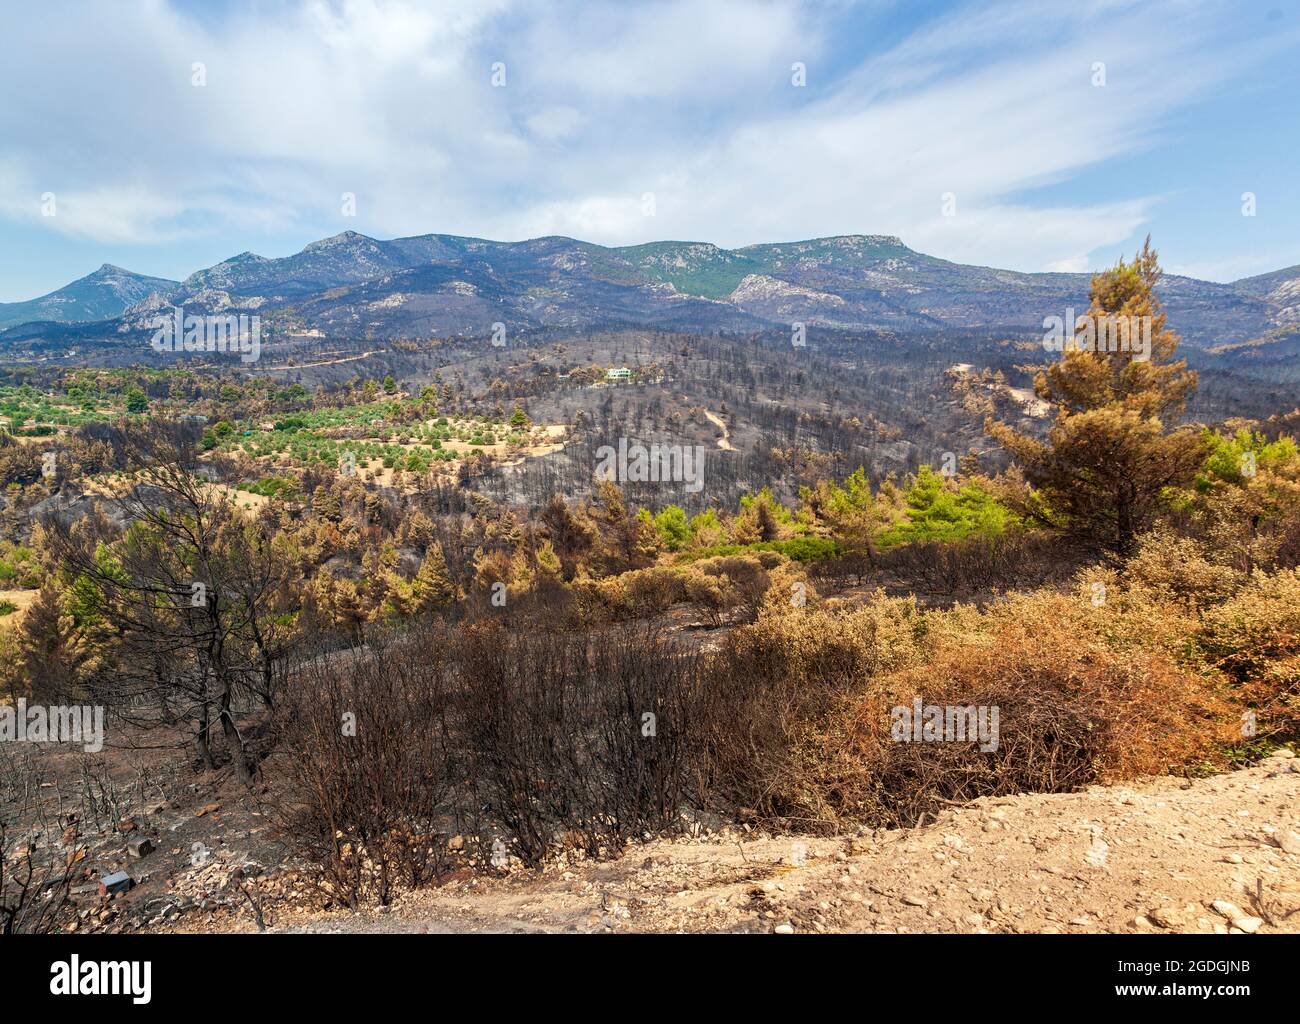 Mount Parnitha, in Attica region, Greece, after the bushfire that destroyed large part of its forests and woods. Stock Photo